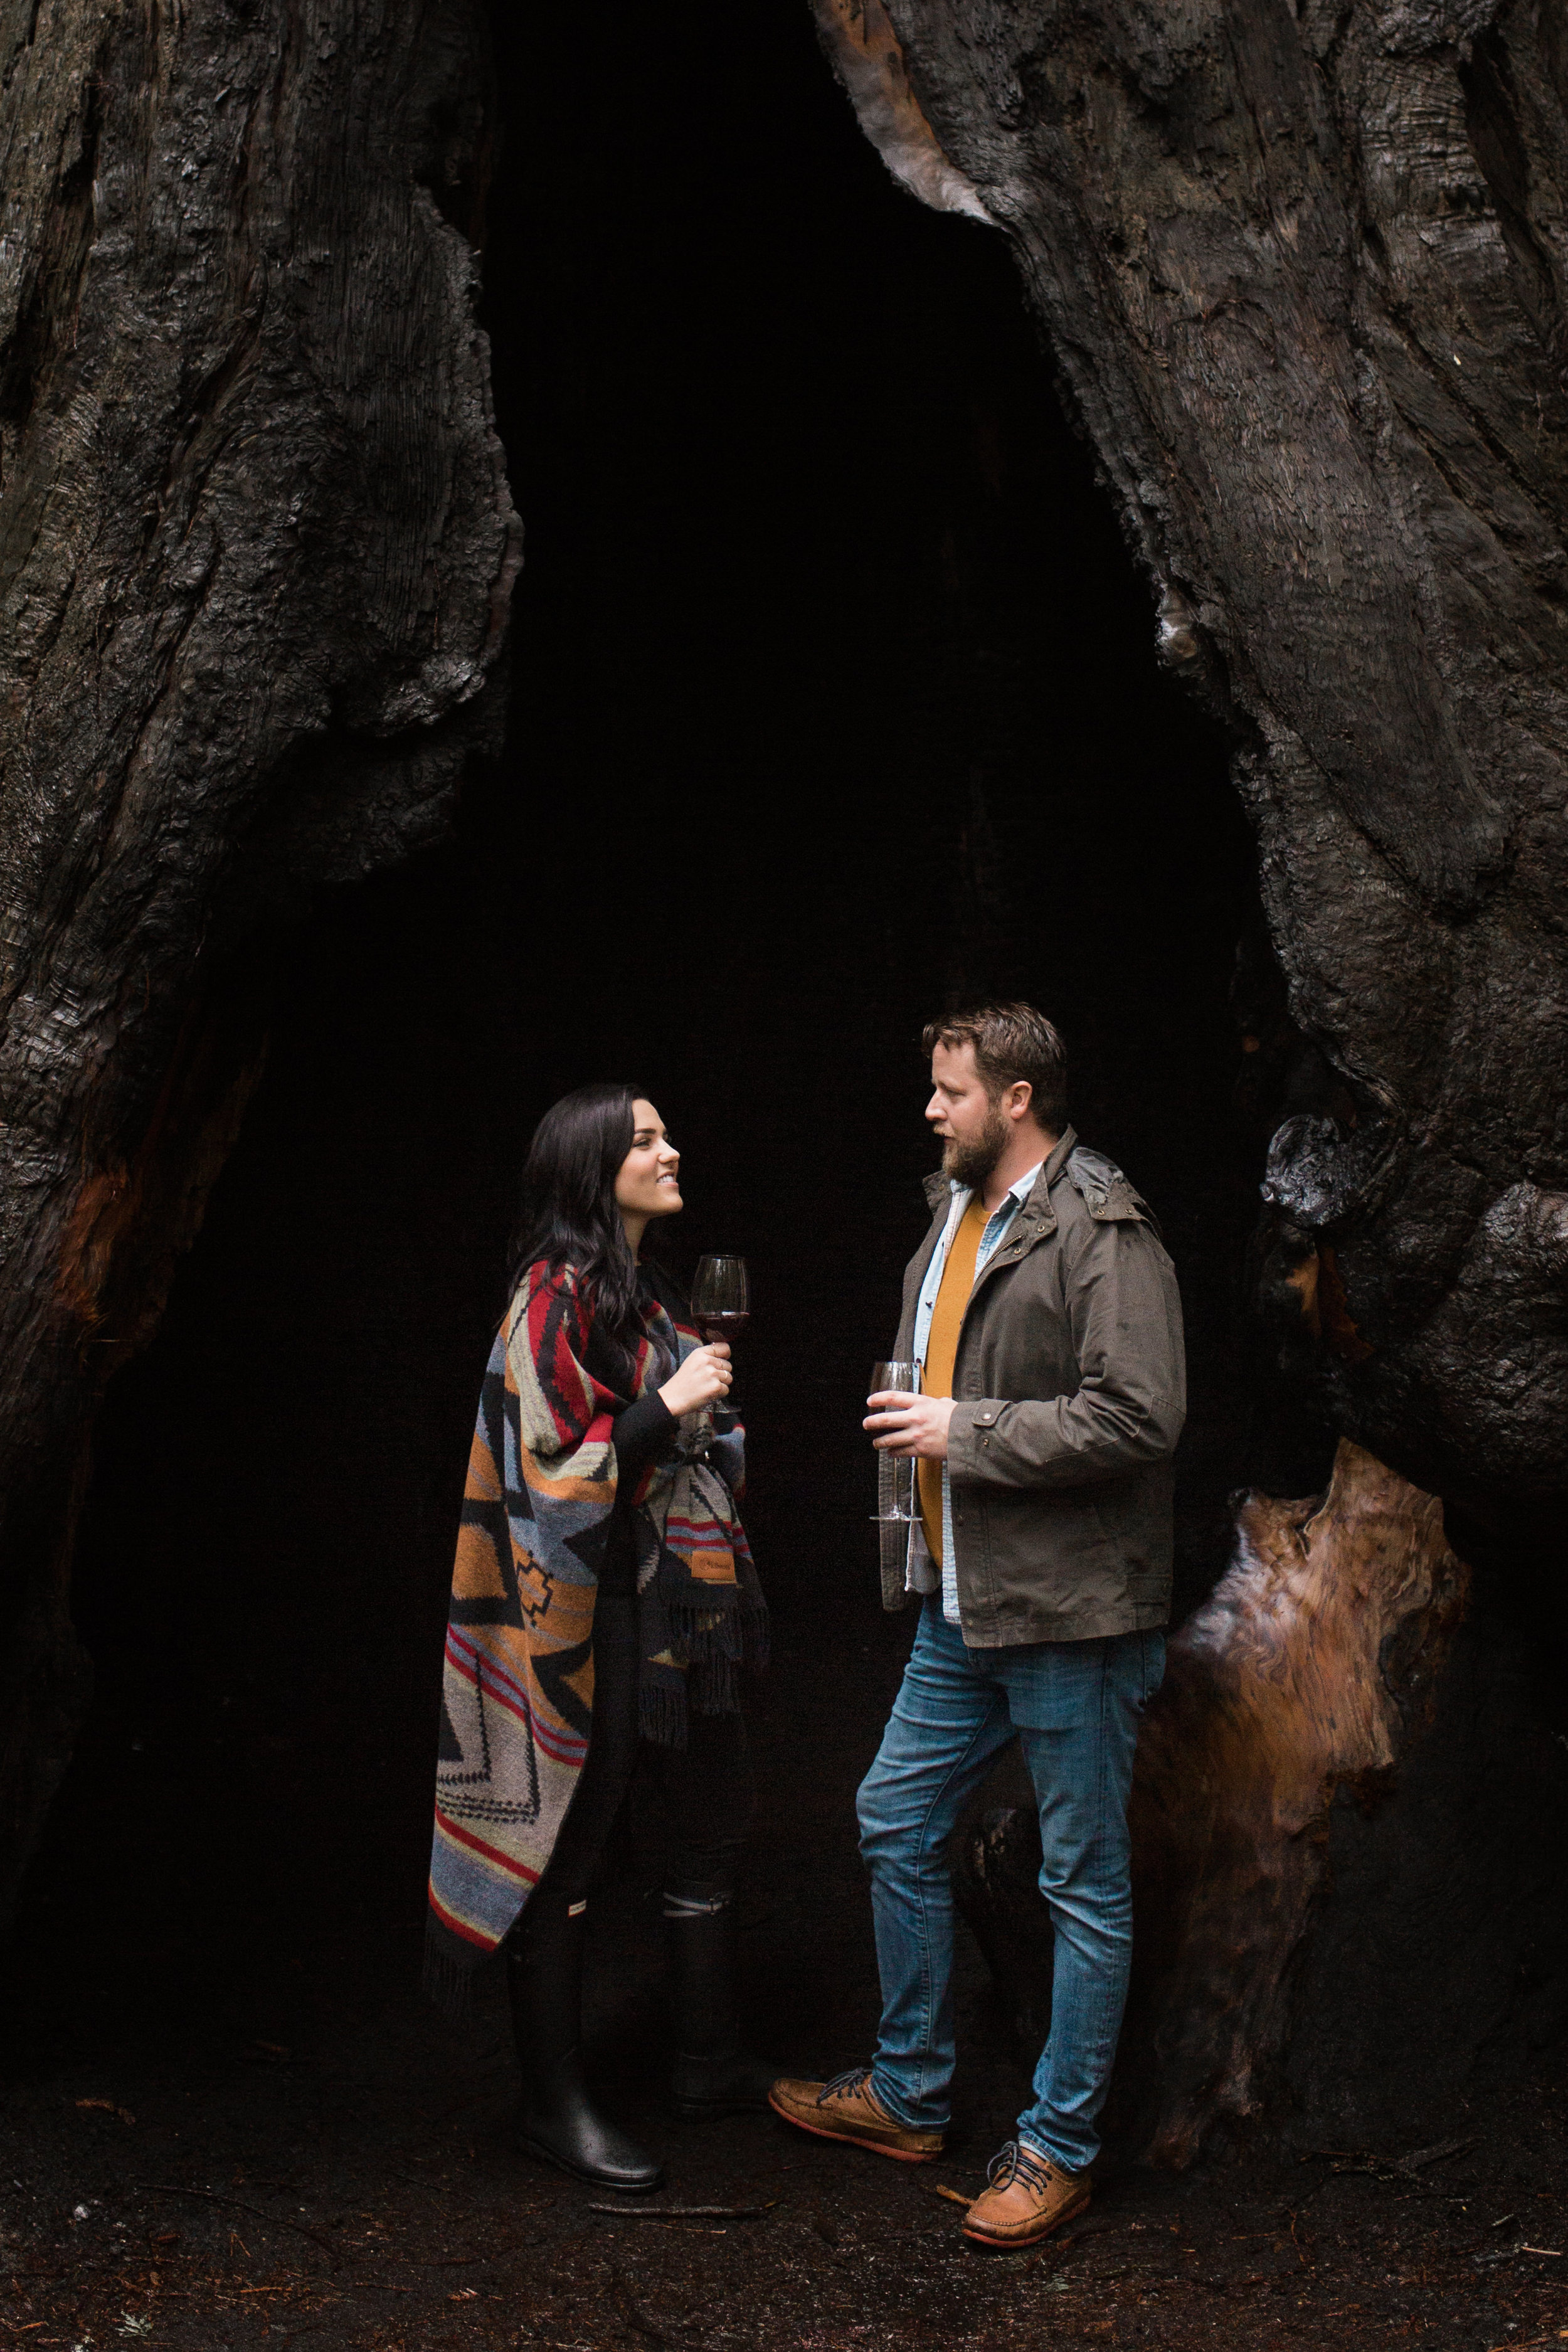 nicole-daacke-photography-redwoods-national-park-forest-rainy-foggy-adventure-engagement-session-humboldt-county-old-growth-redwood-tree-elopement-intimate-wedding-photographer-5.jpg